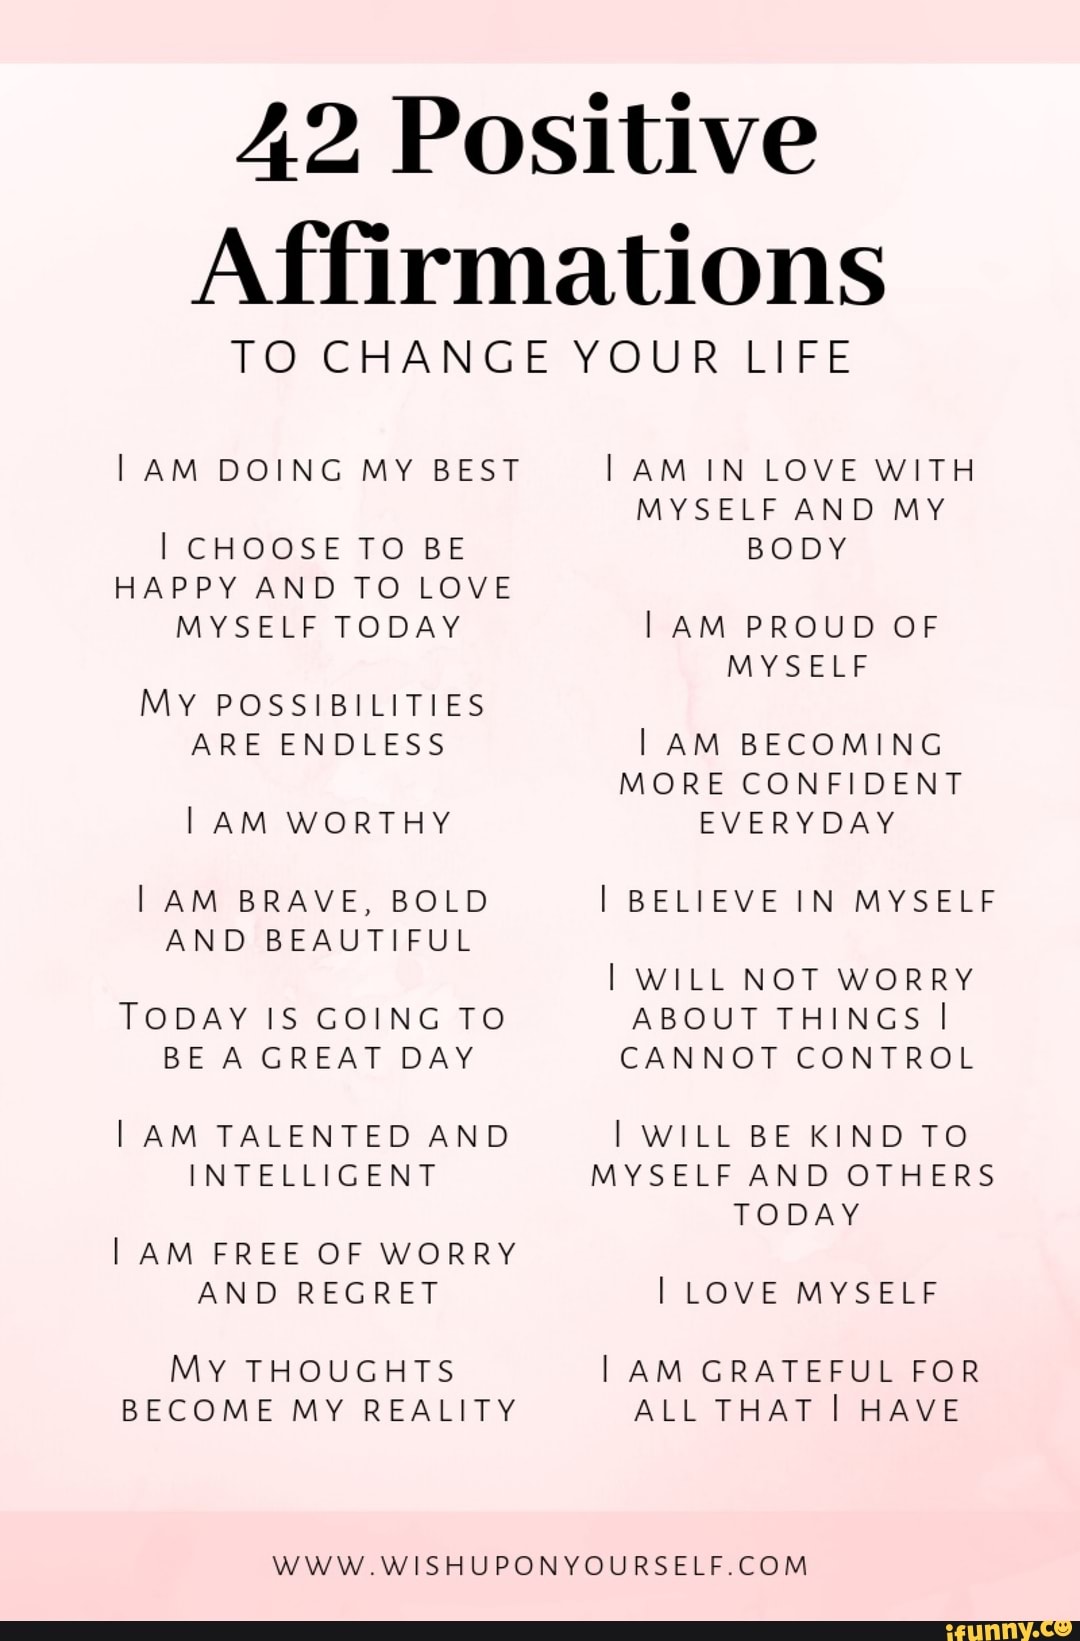 42-positive-affirmations-to-change-your-life-i-am-doing-my-best-i